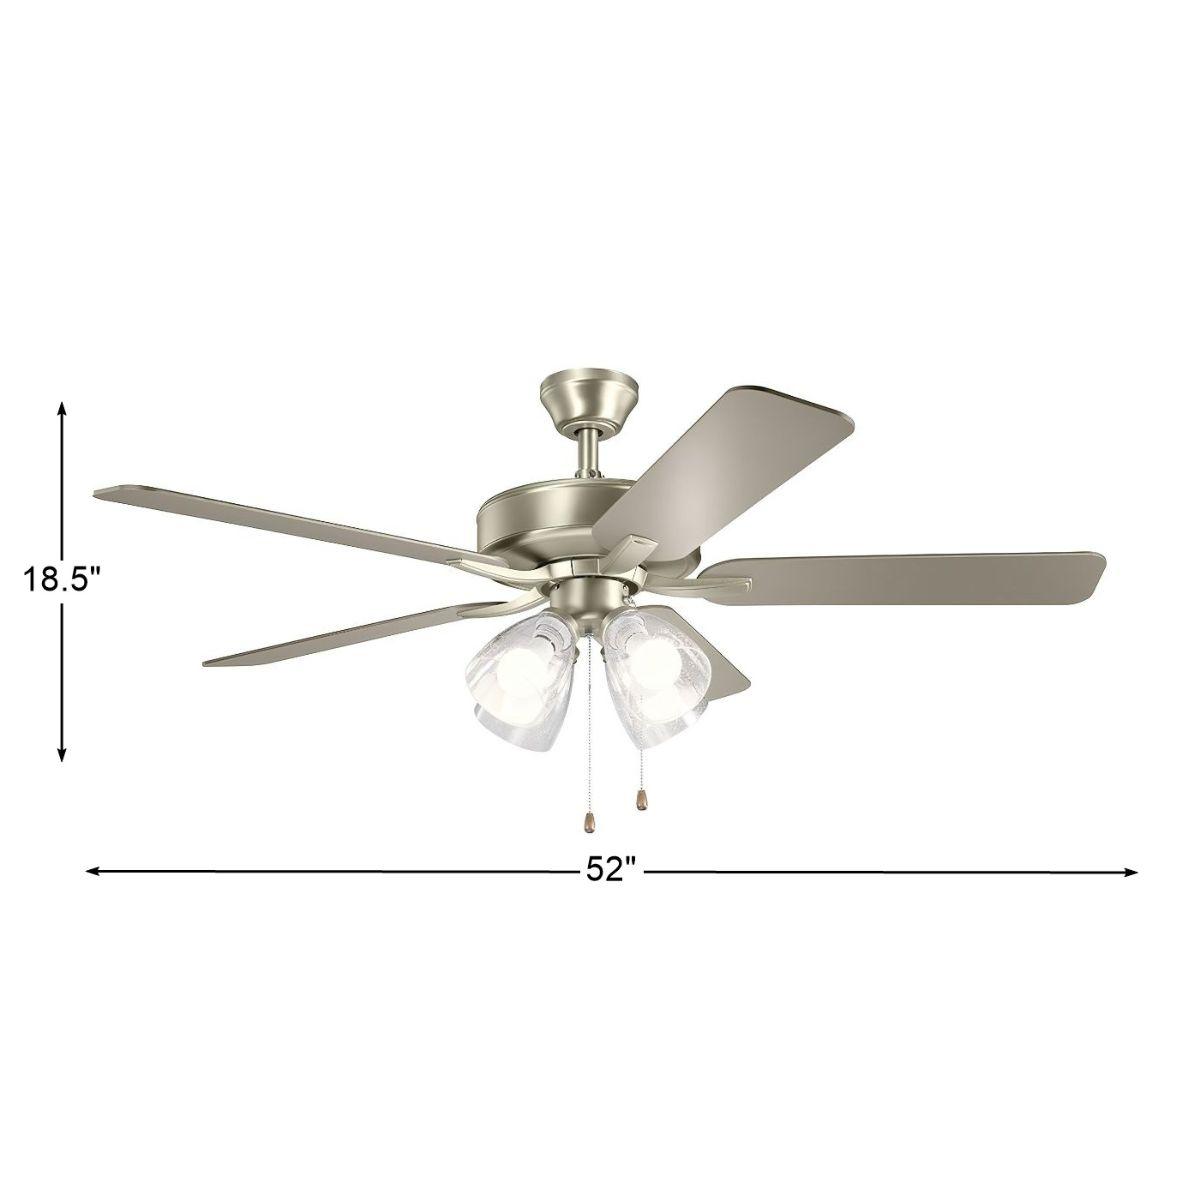 Basics Pro 52 Inch Ceiling Fan With Light, Clear Glass, Pull Chain Included - Bees Lighting